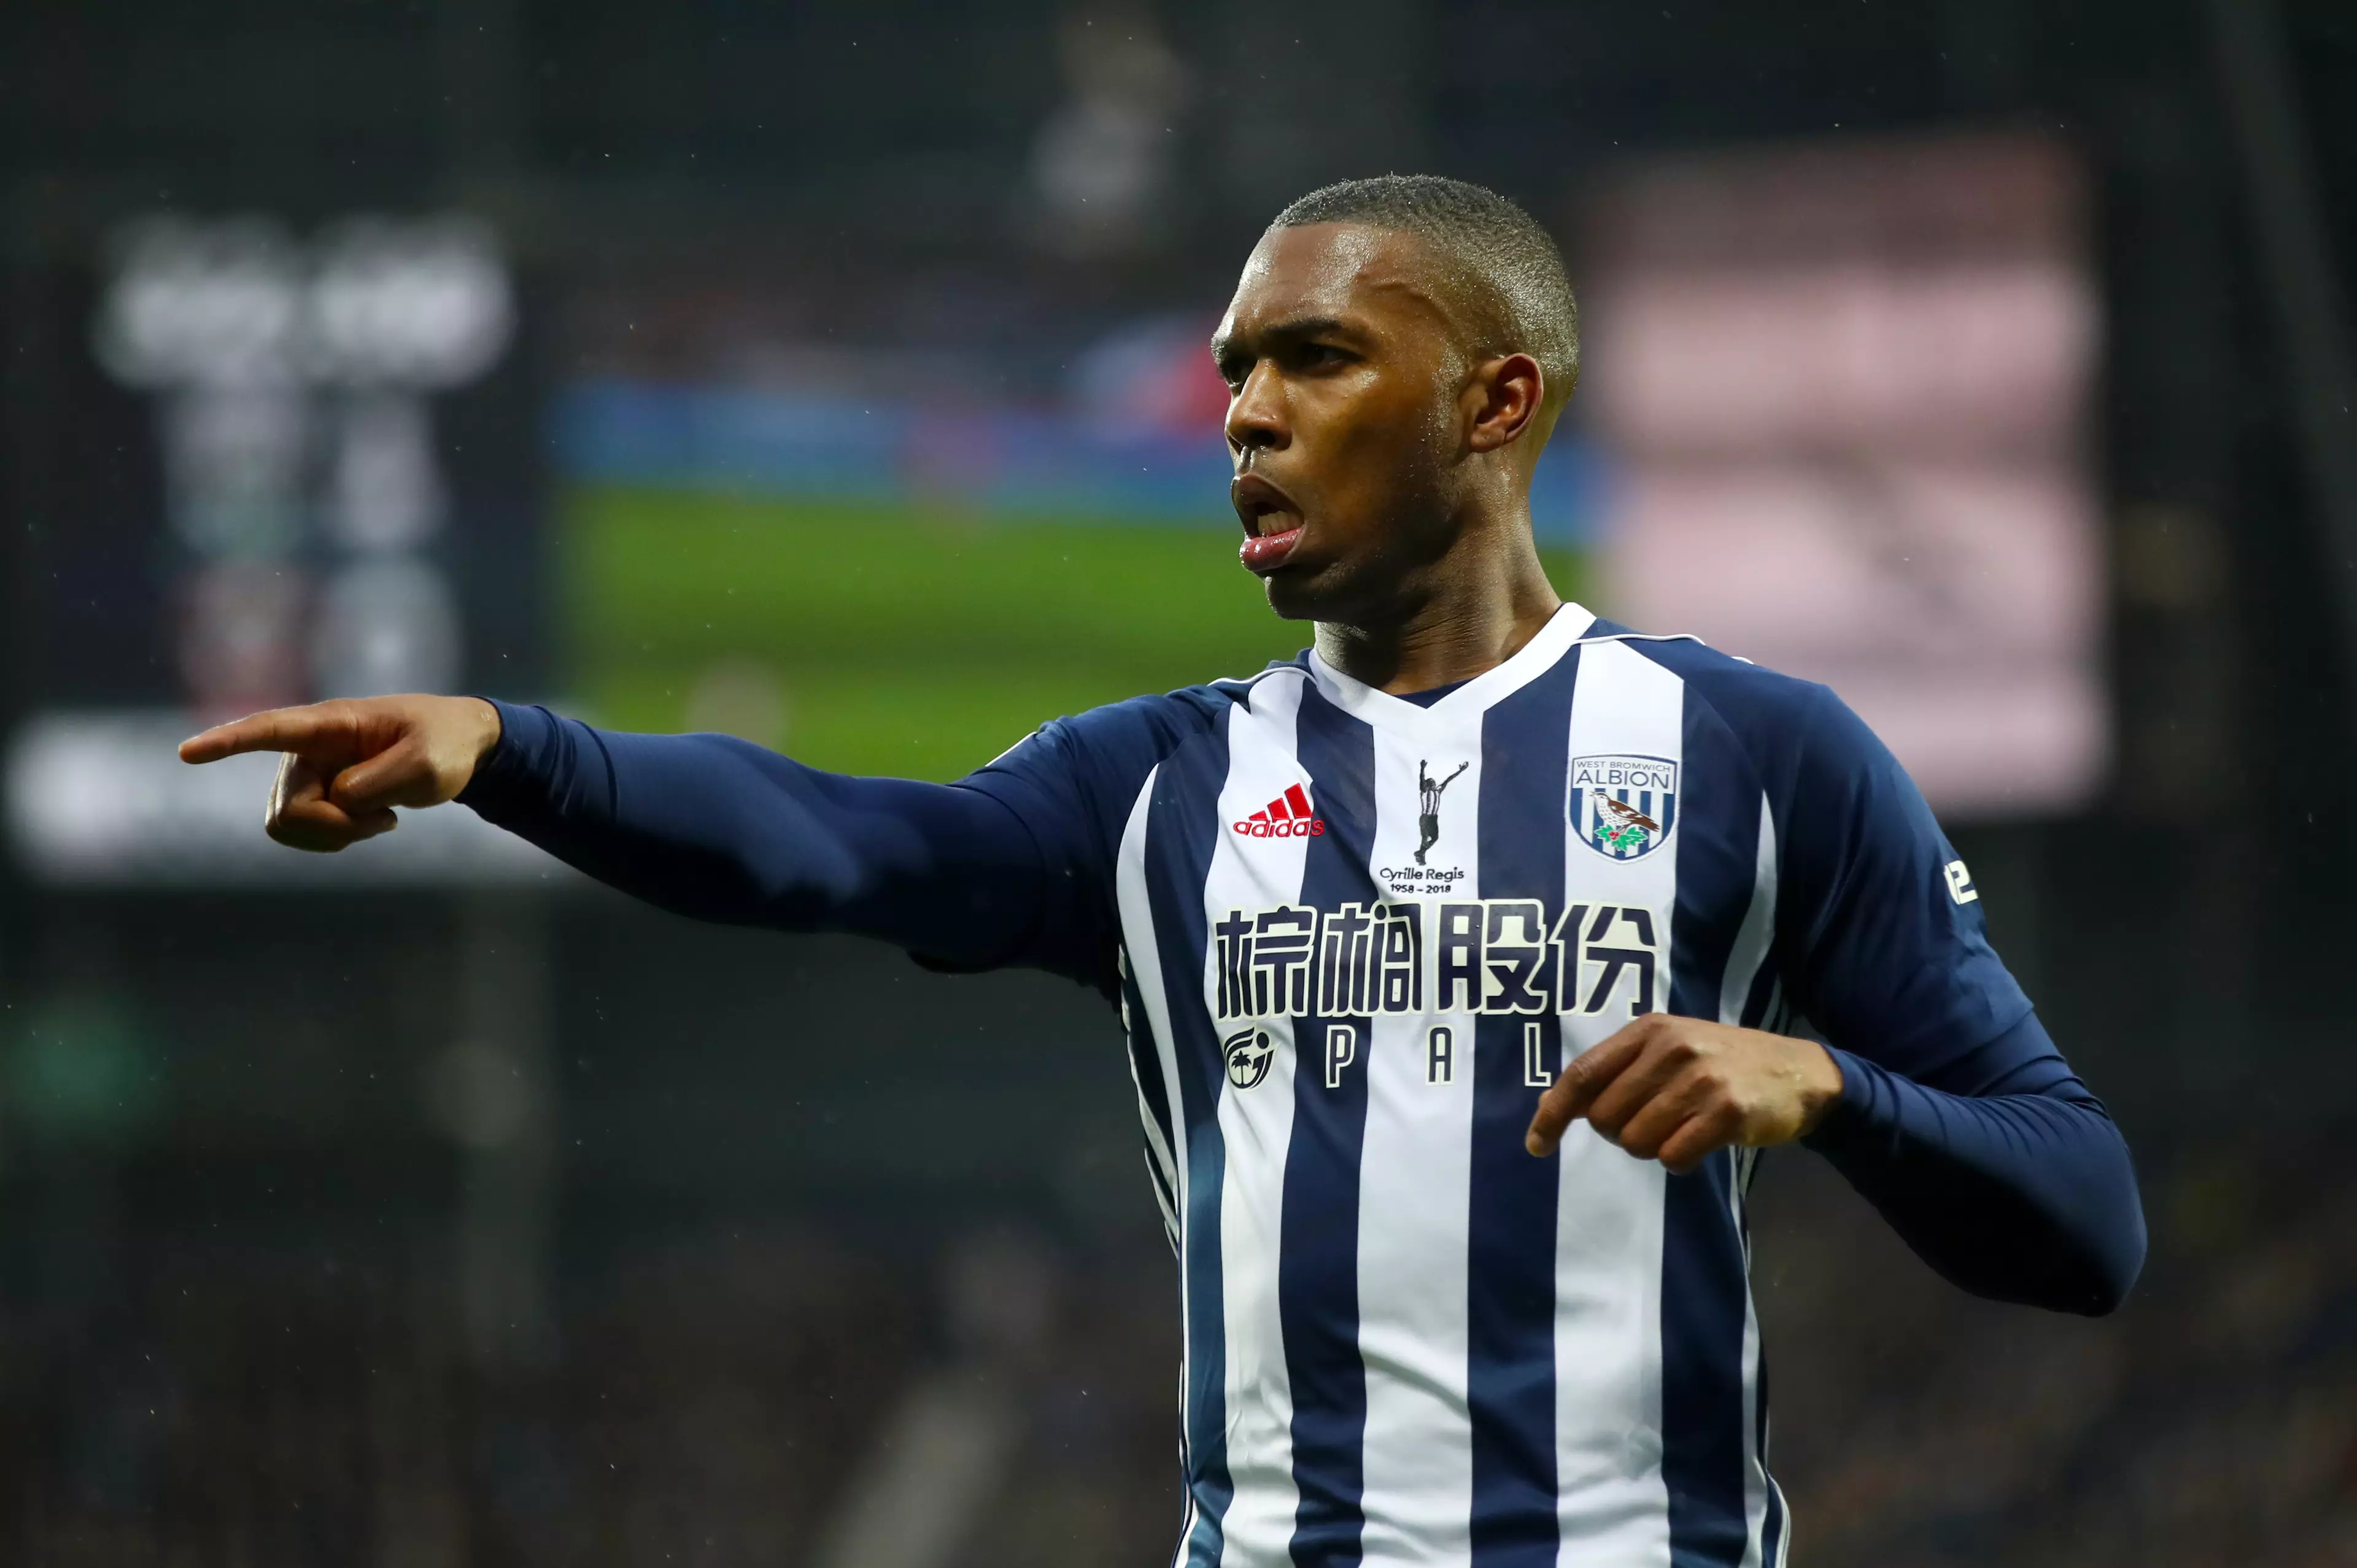 Sturridge's time at West Brom wasn't a success. Image: PA Images